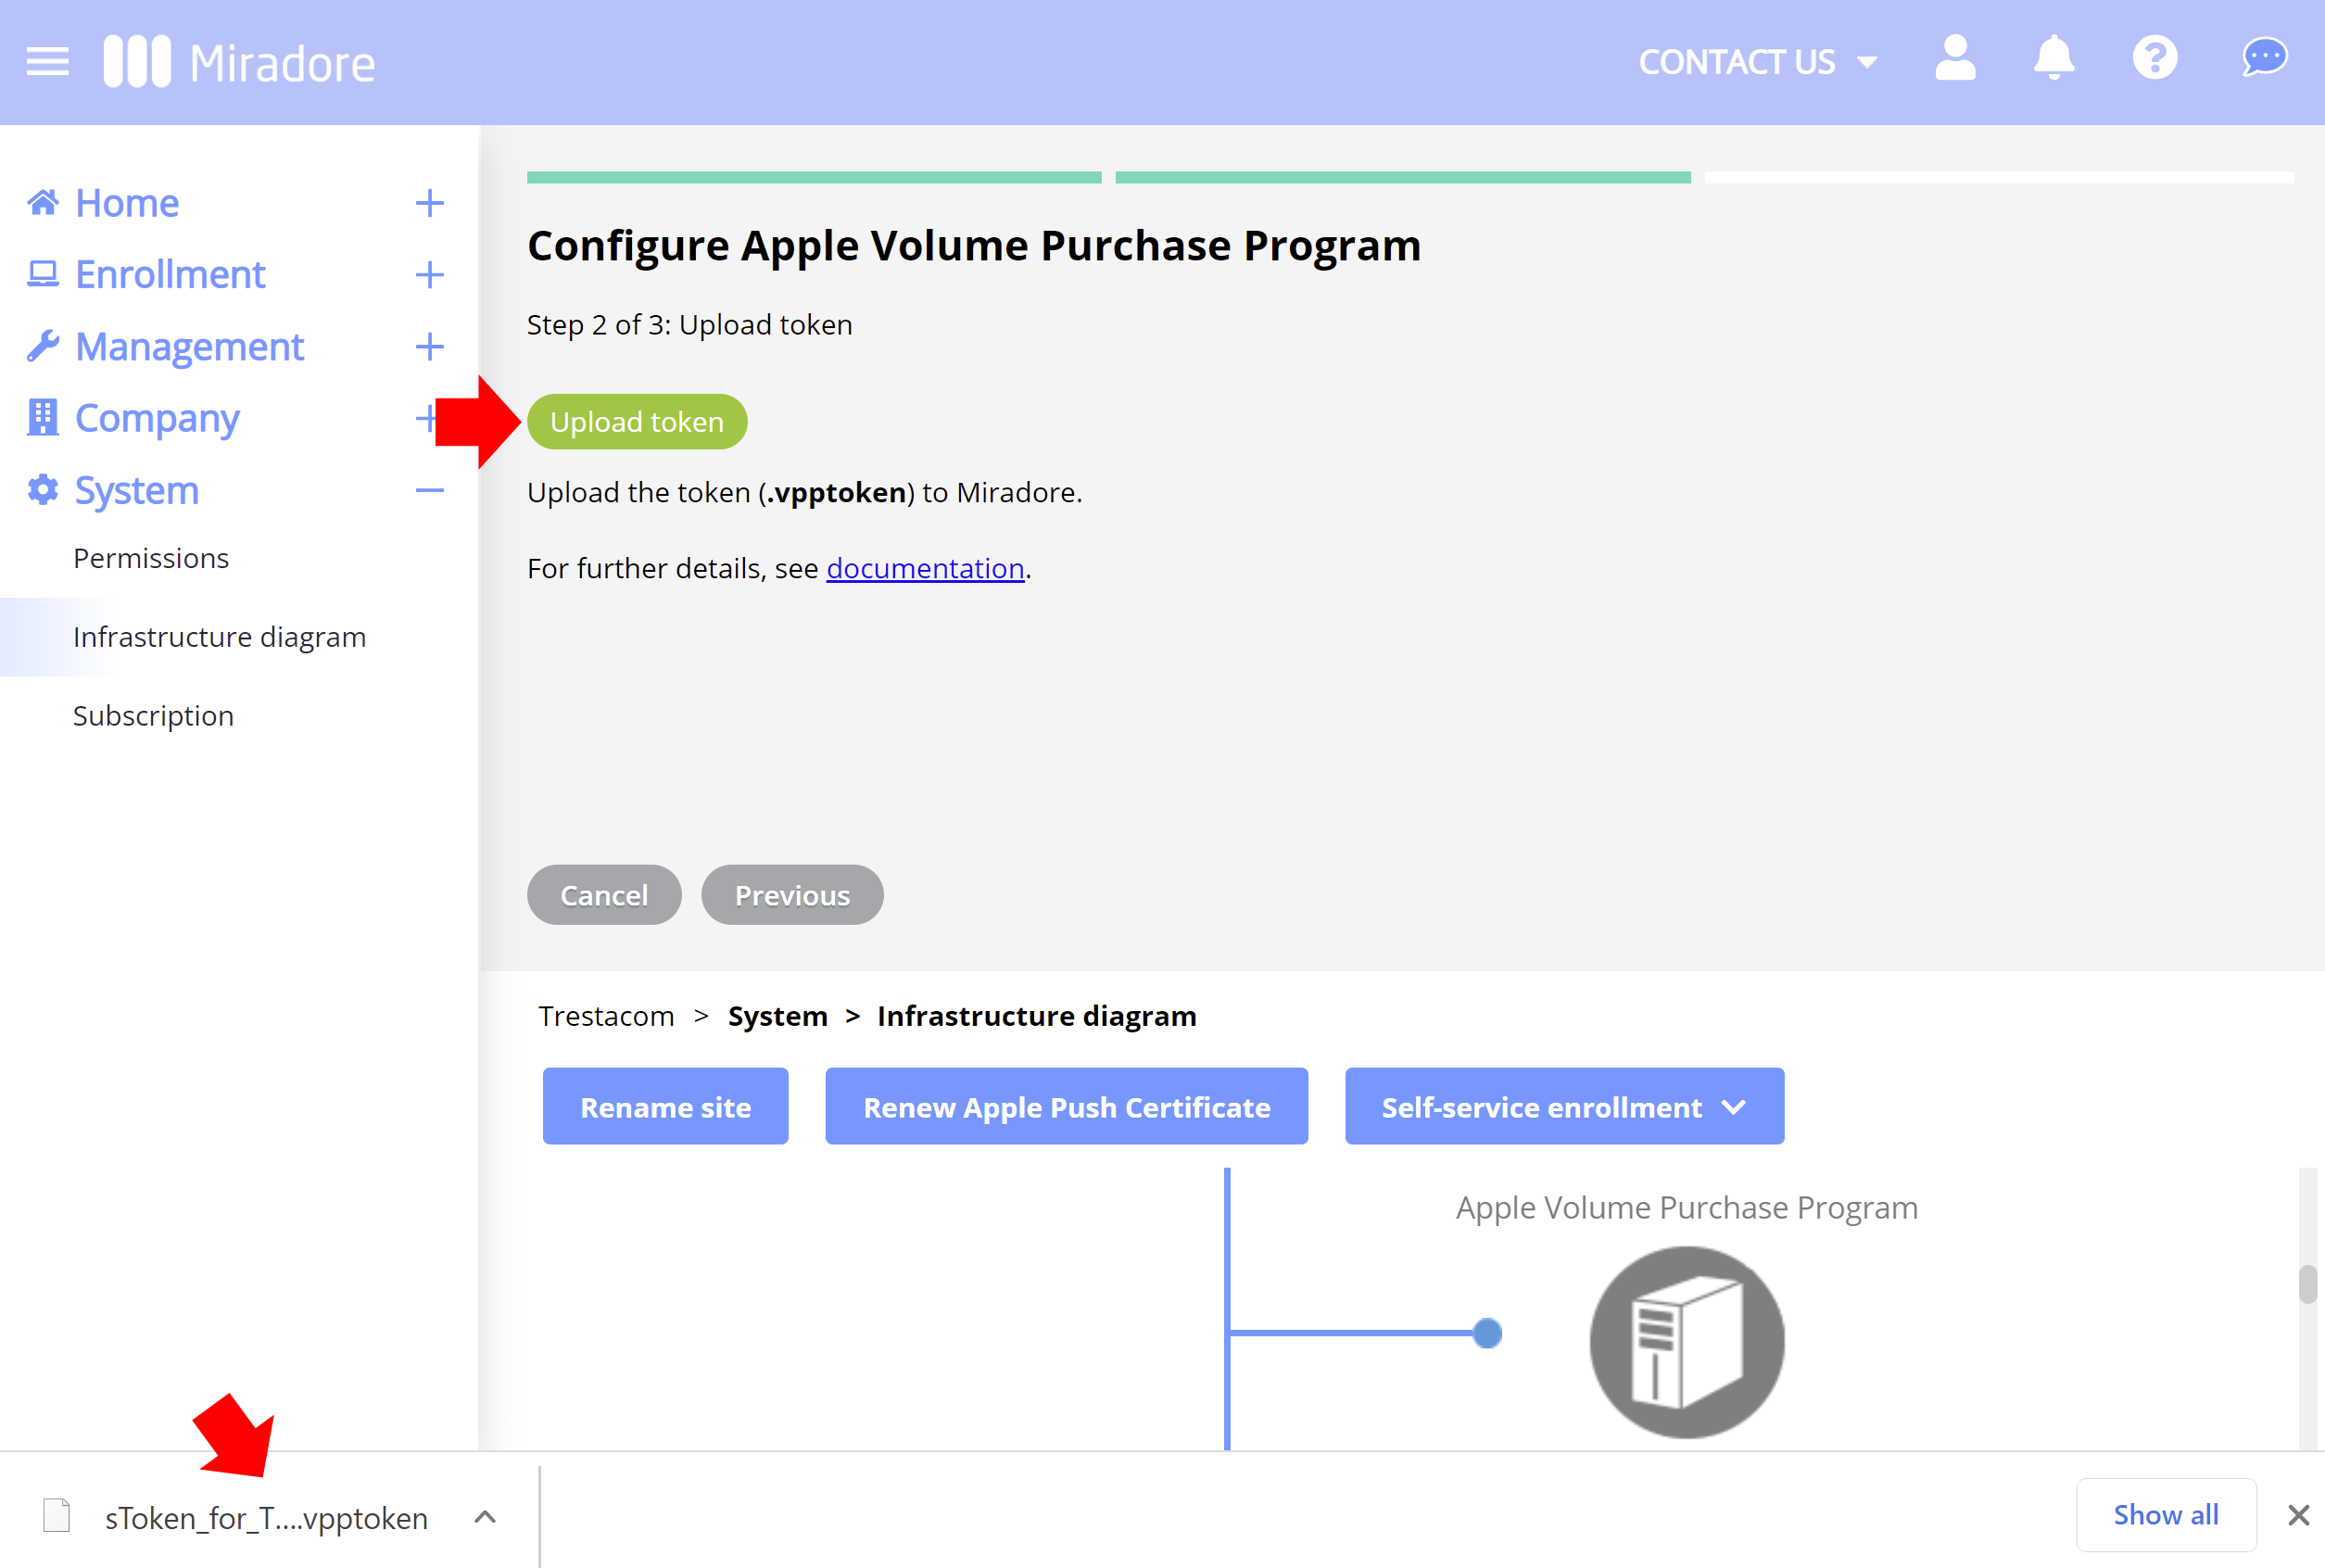 How to upload the Apple VPP token to Miradore MDM.